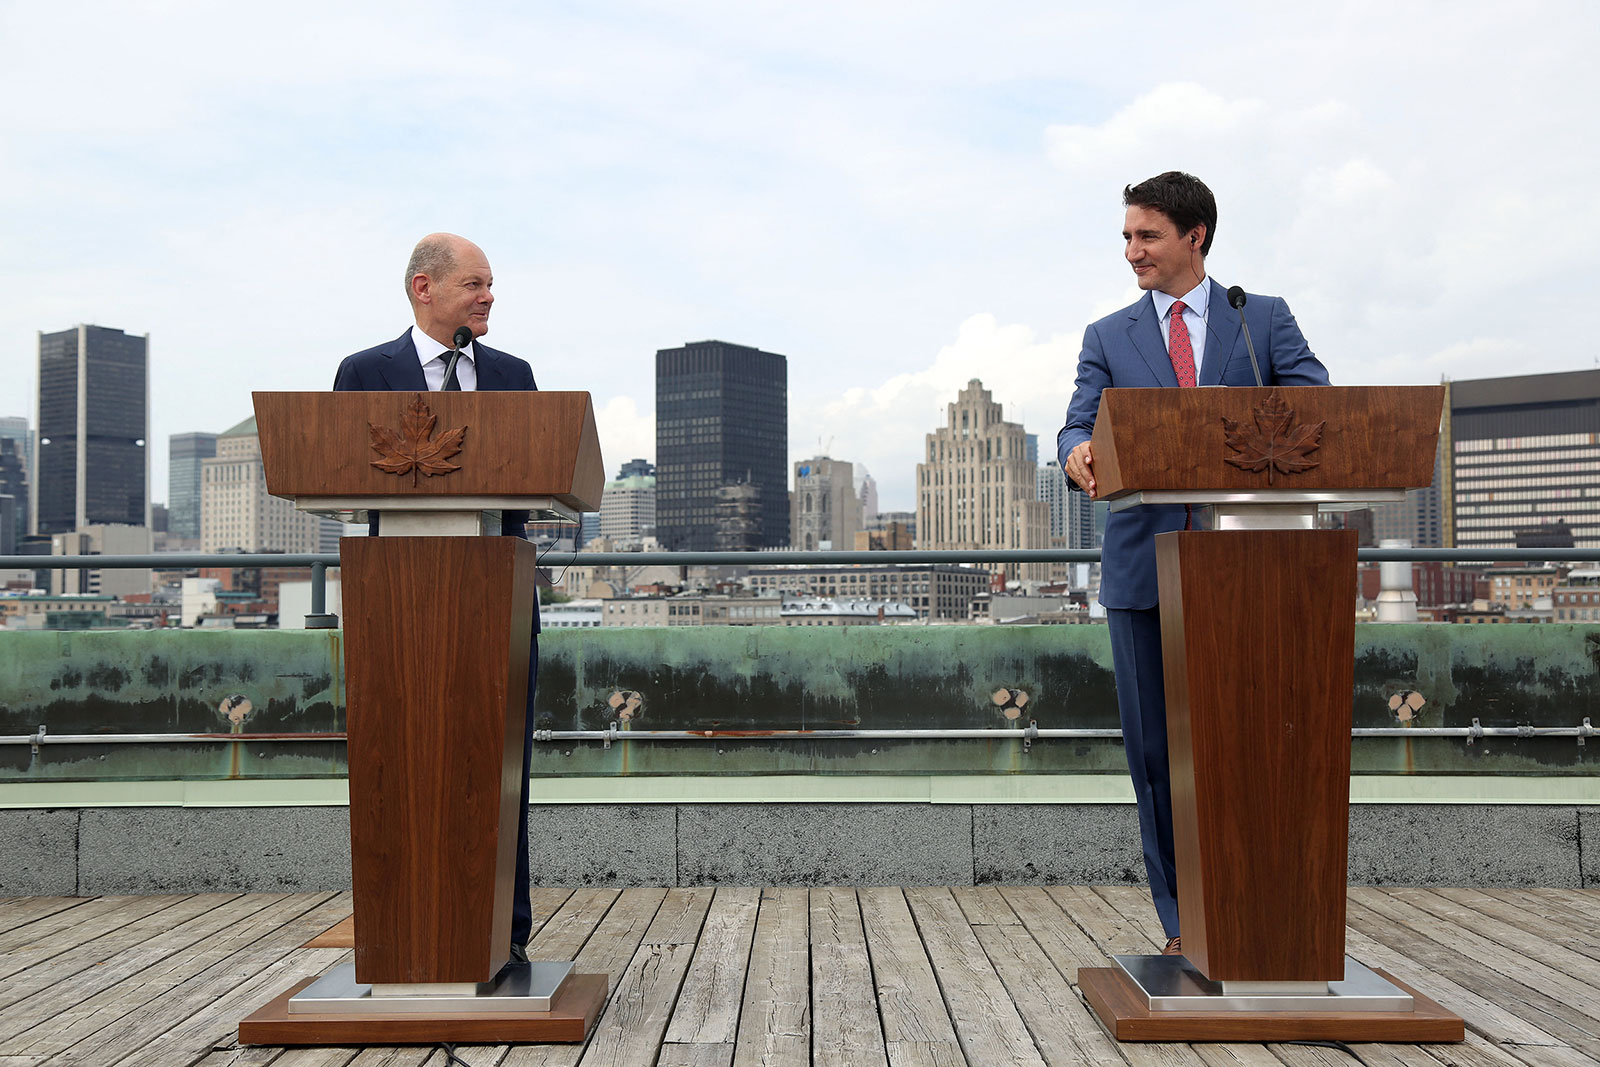 Canada's Prime Minister Justin Trudeau, right, and German Chancellor Olaf Scholz participate in a news conference in Montreal, Quebec, Canada, on August 22.